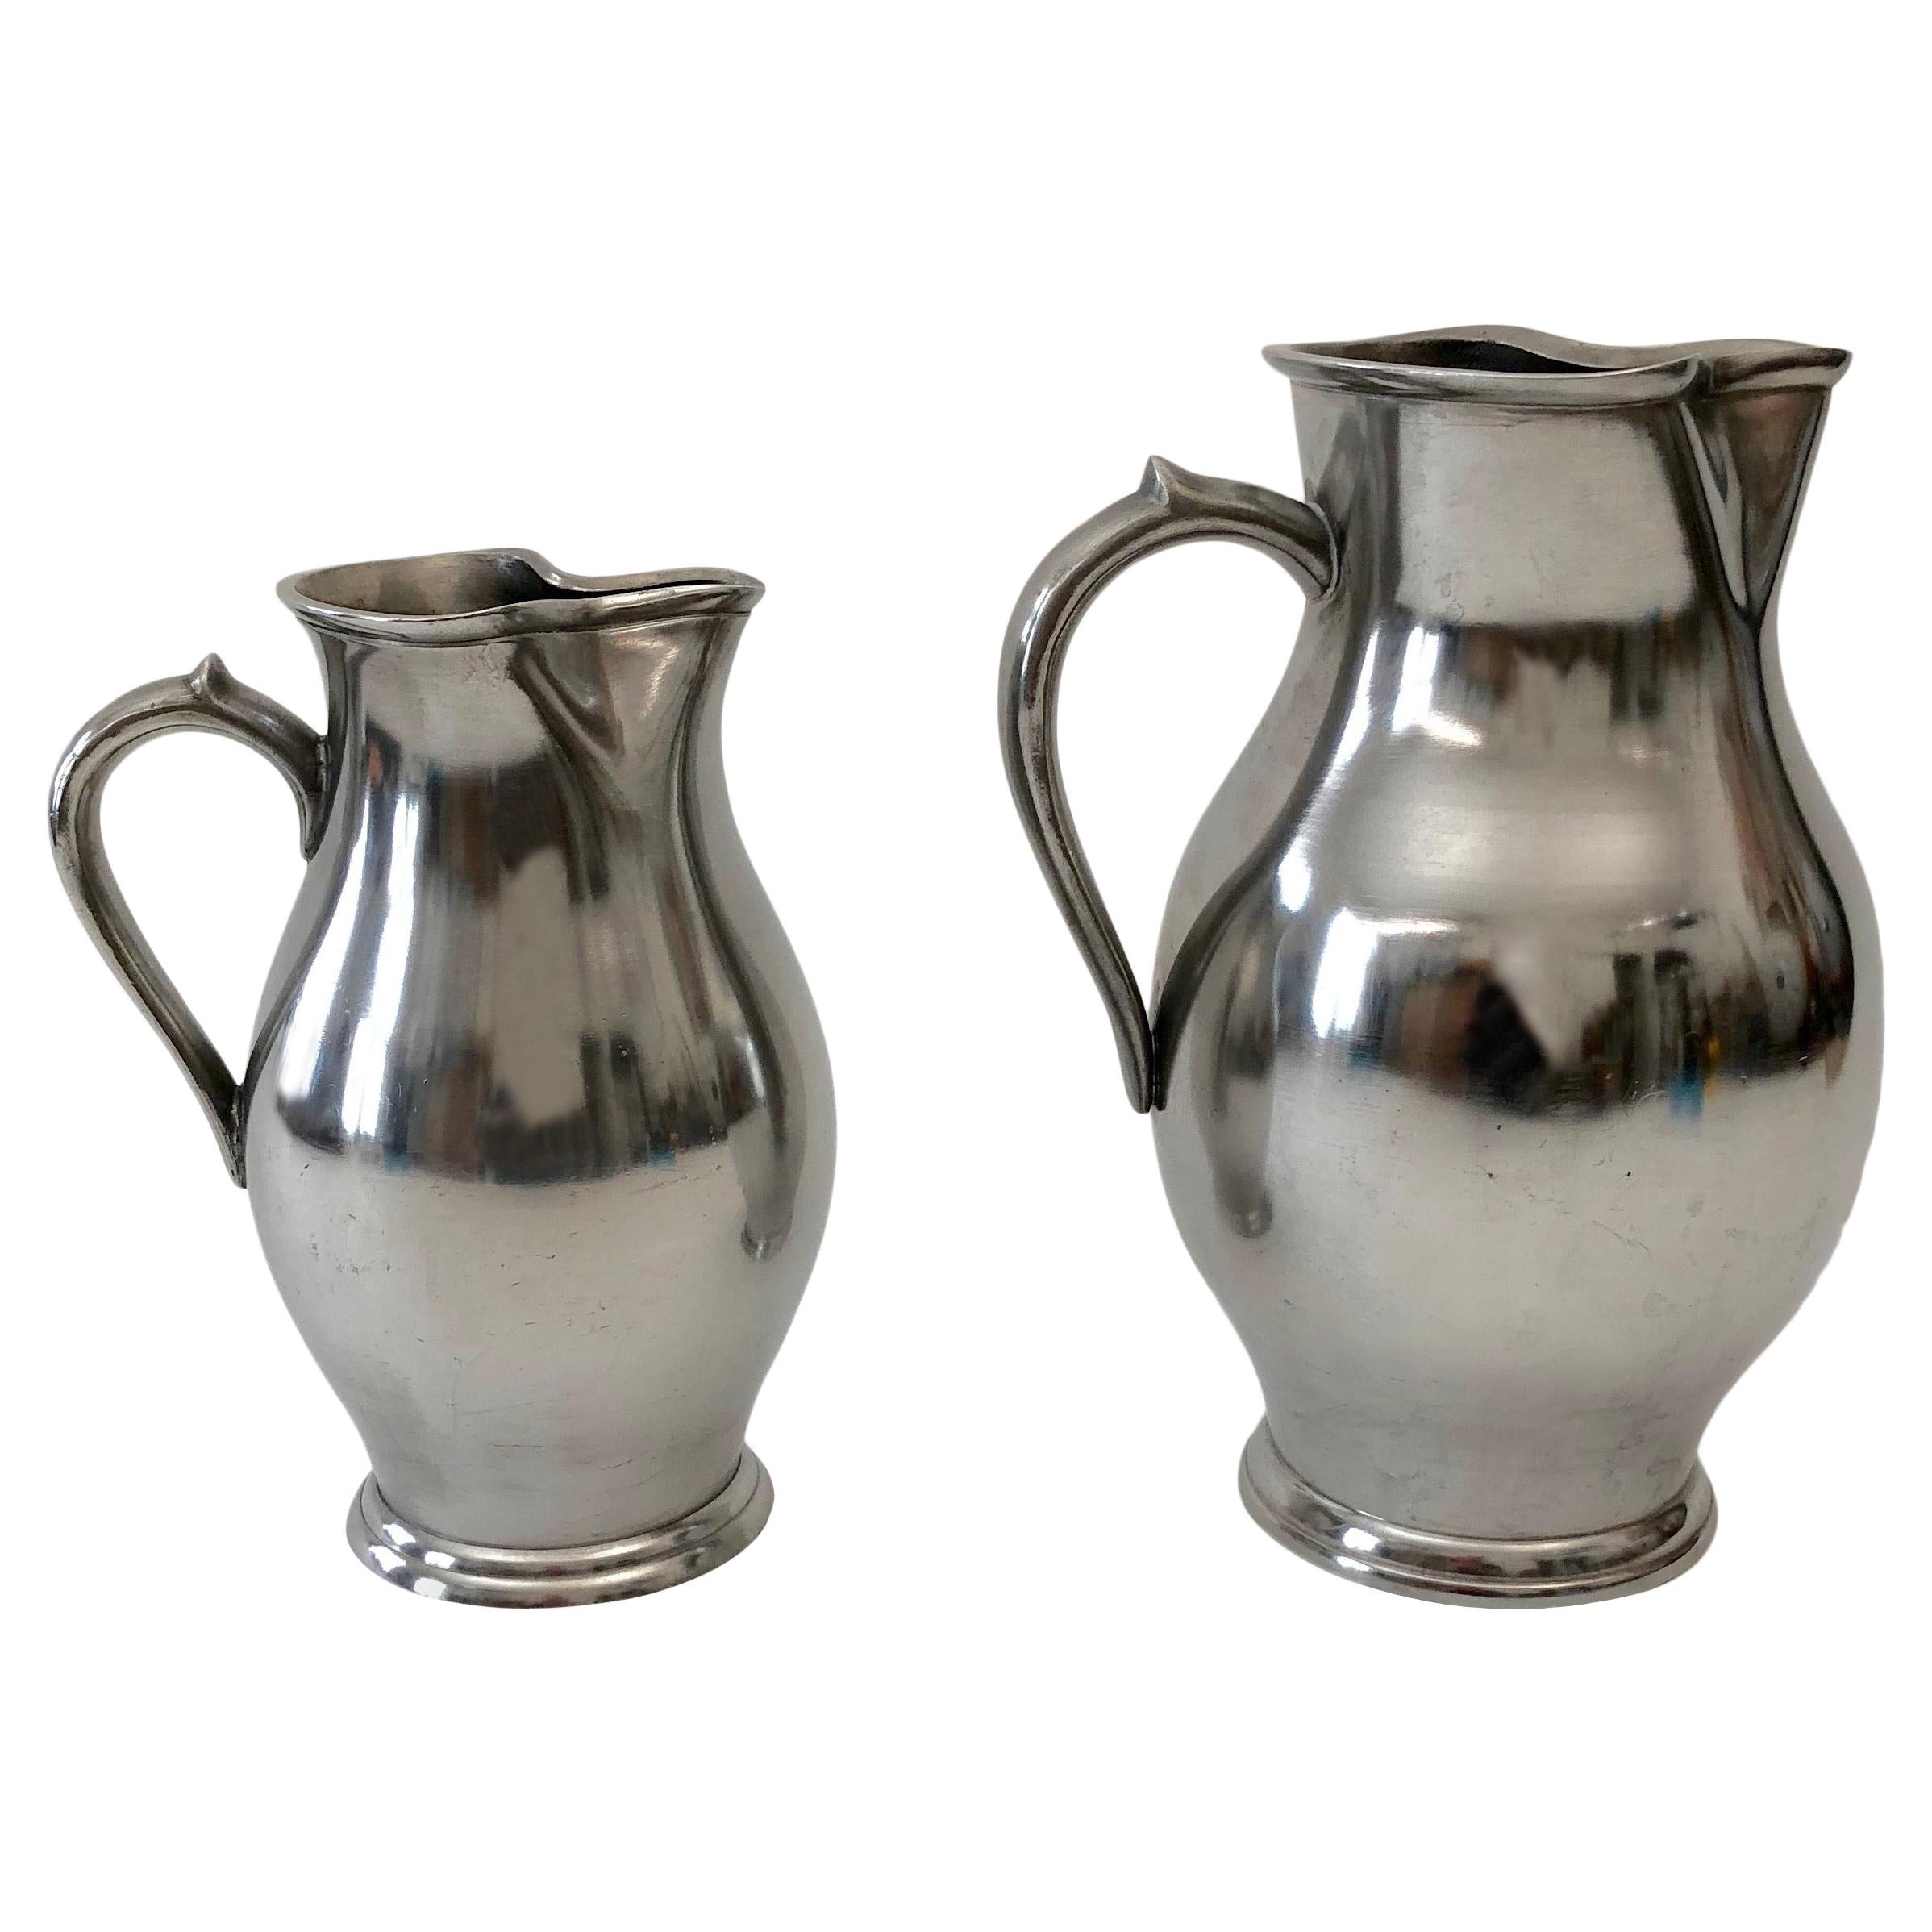 Two Pewter Wine Jugs from the Wiener Zin Manufacture Dated 1837